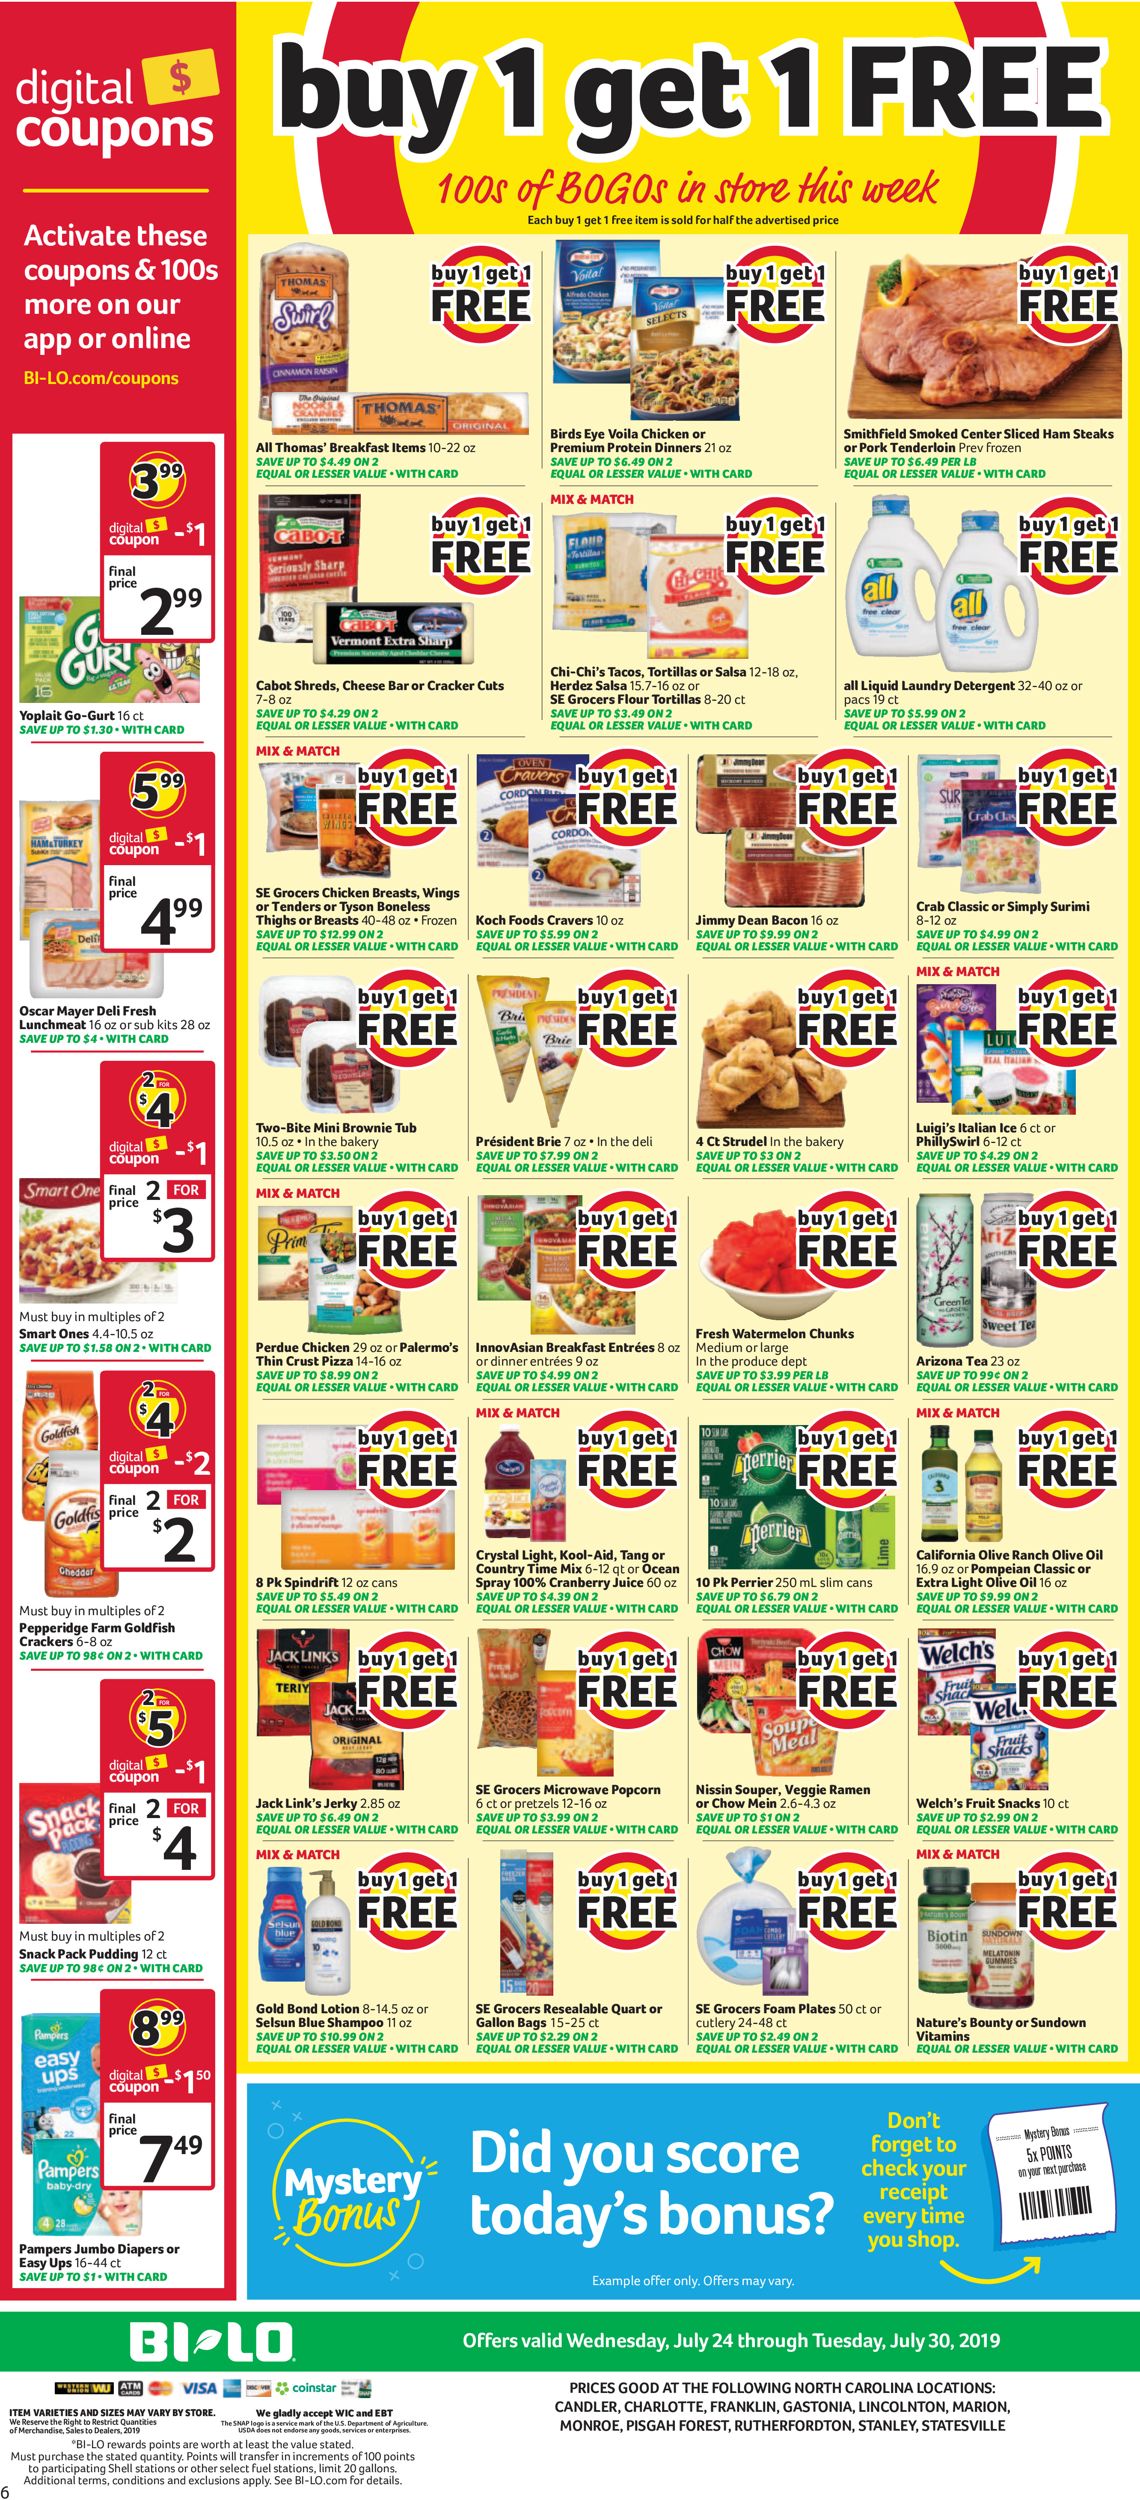 BI-LO Current weekly ad 07/24 - 07/30/2019 6 - frequent ...